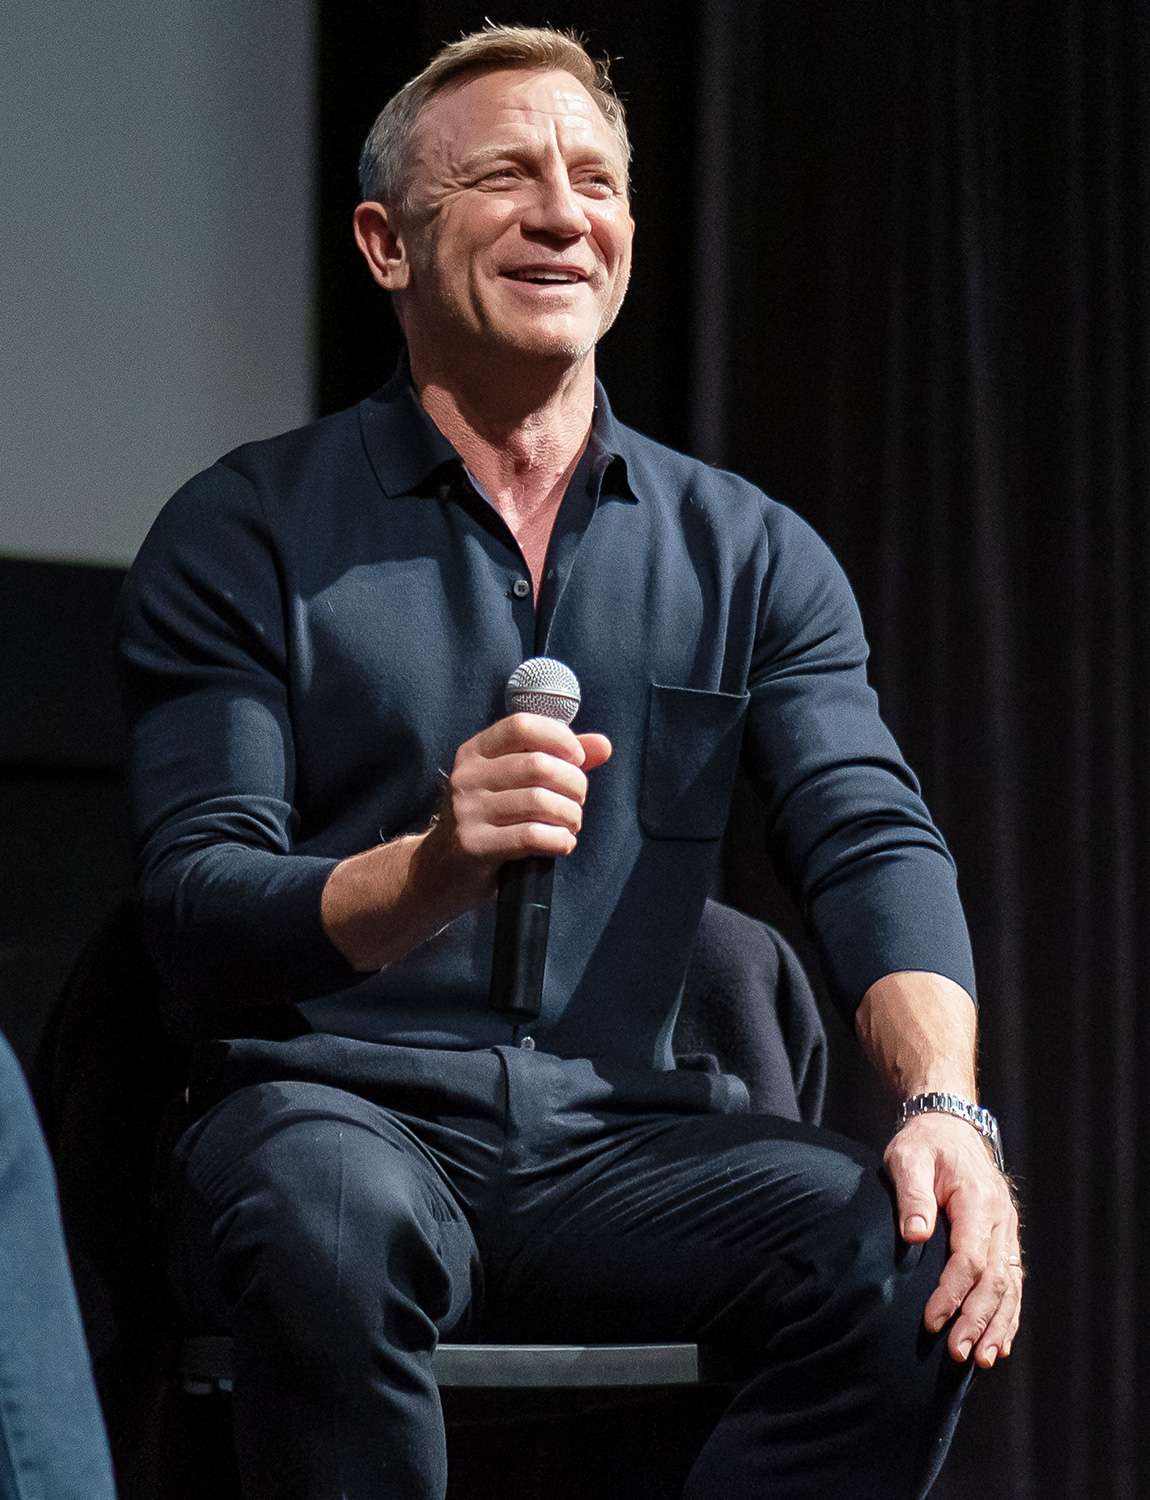 Daniel Craig attends The Museum of Modern Art Screening of Casino Royale at MOMA on March 03, 2020 in New York City